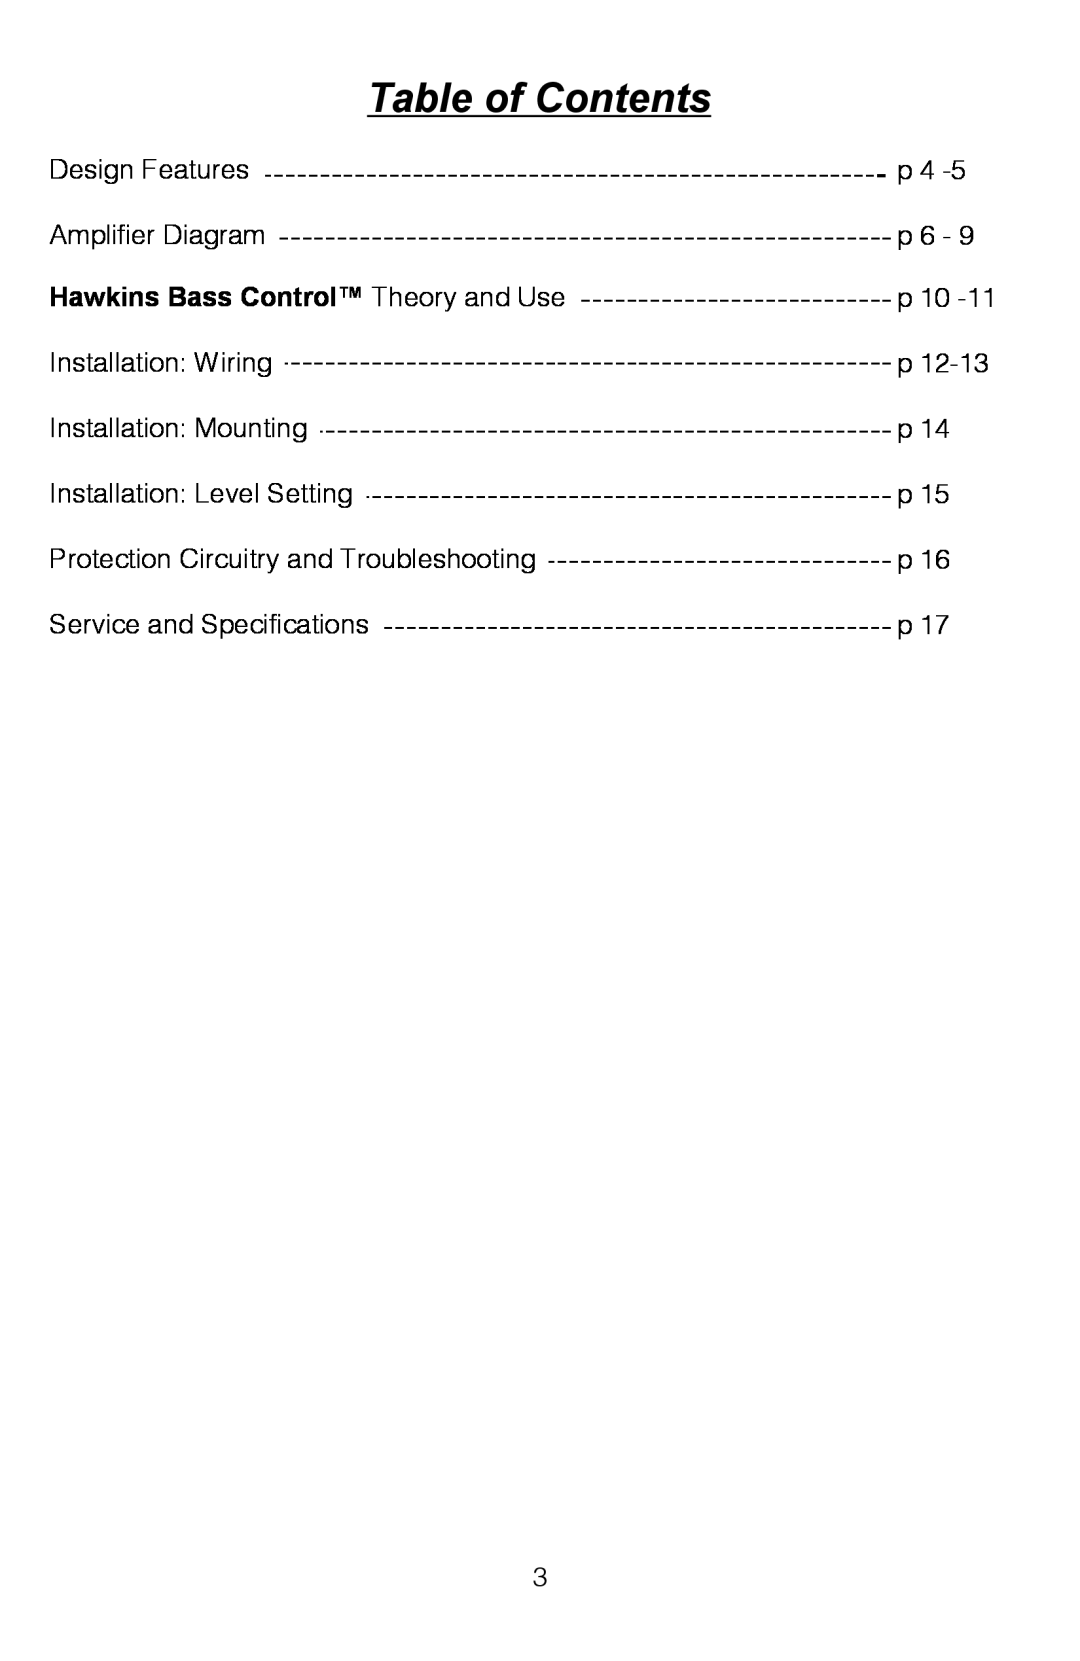 Soundstream Technologies HRU. 2, HRU. 4 owner manual Table of Contents, Hawkins Bass Control Theory and Use 